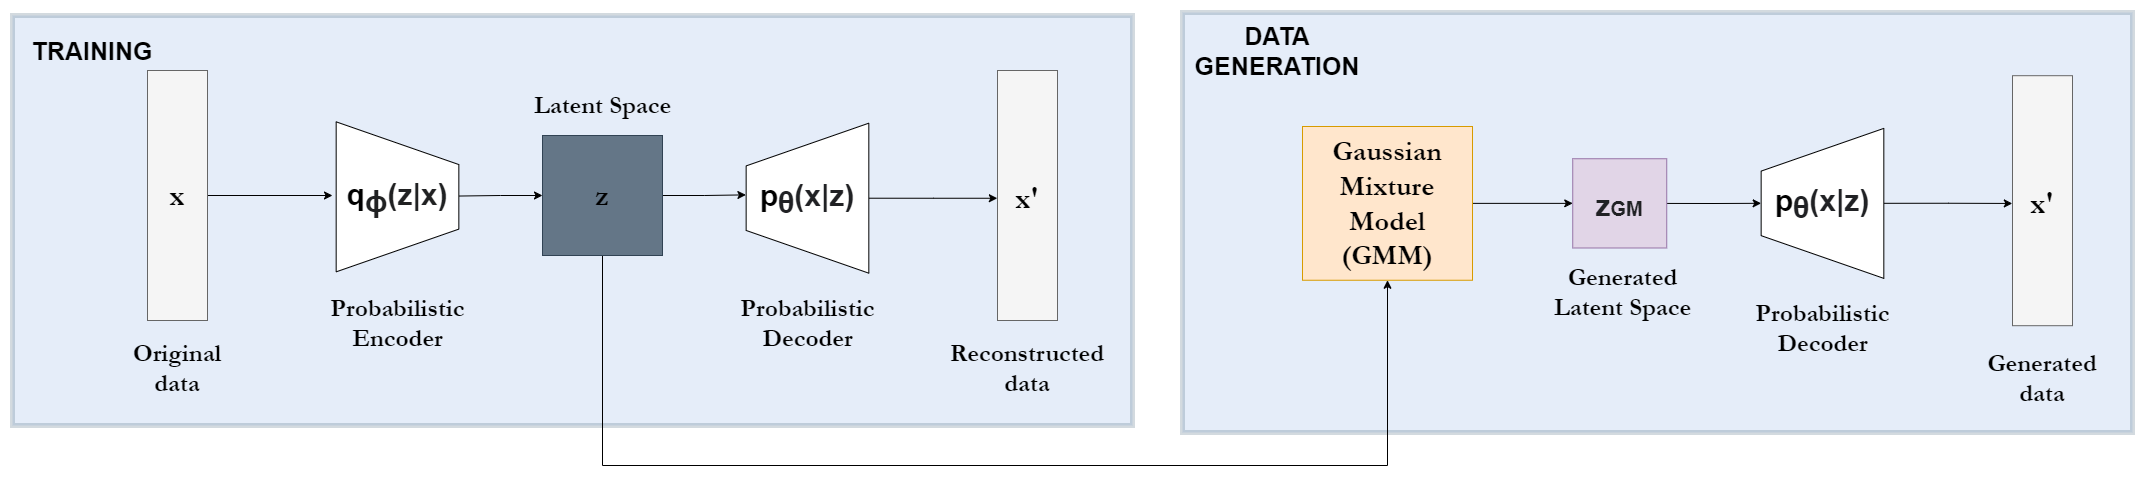 An improved tabular data generator with VAE-GMM integration